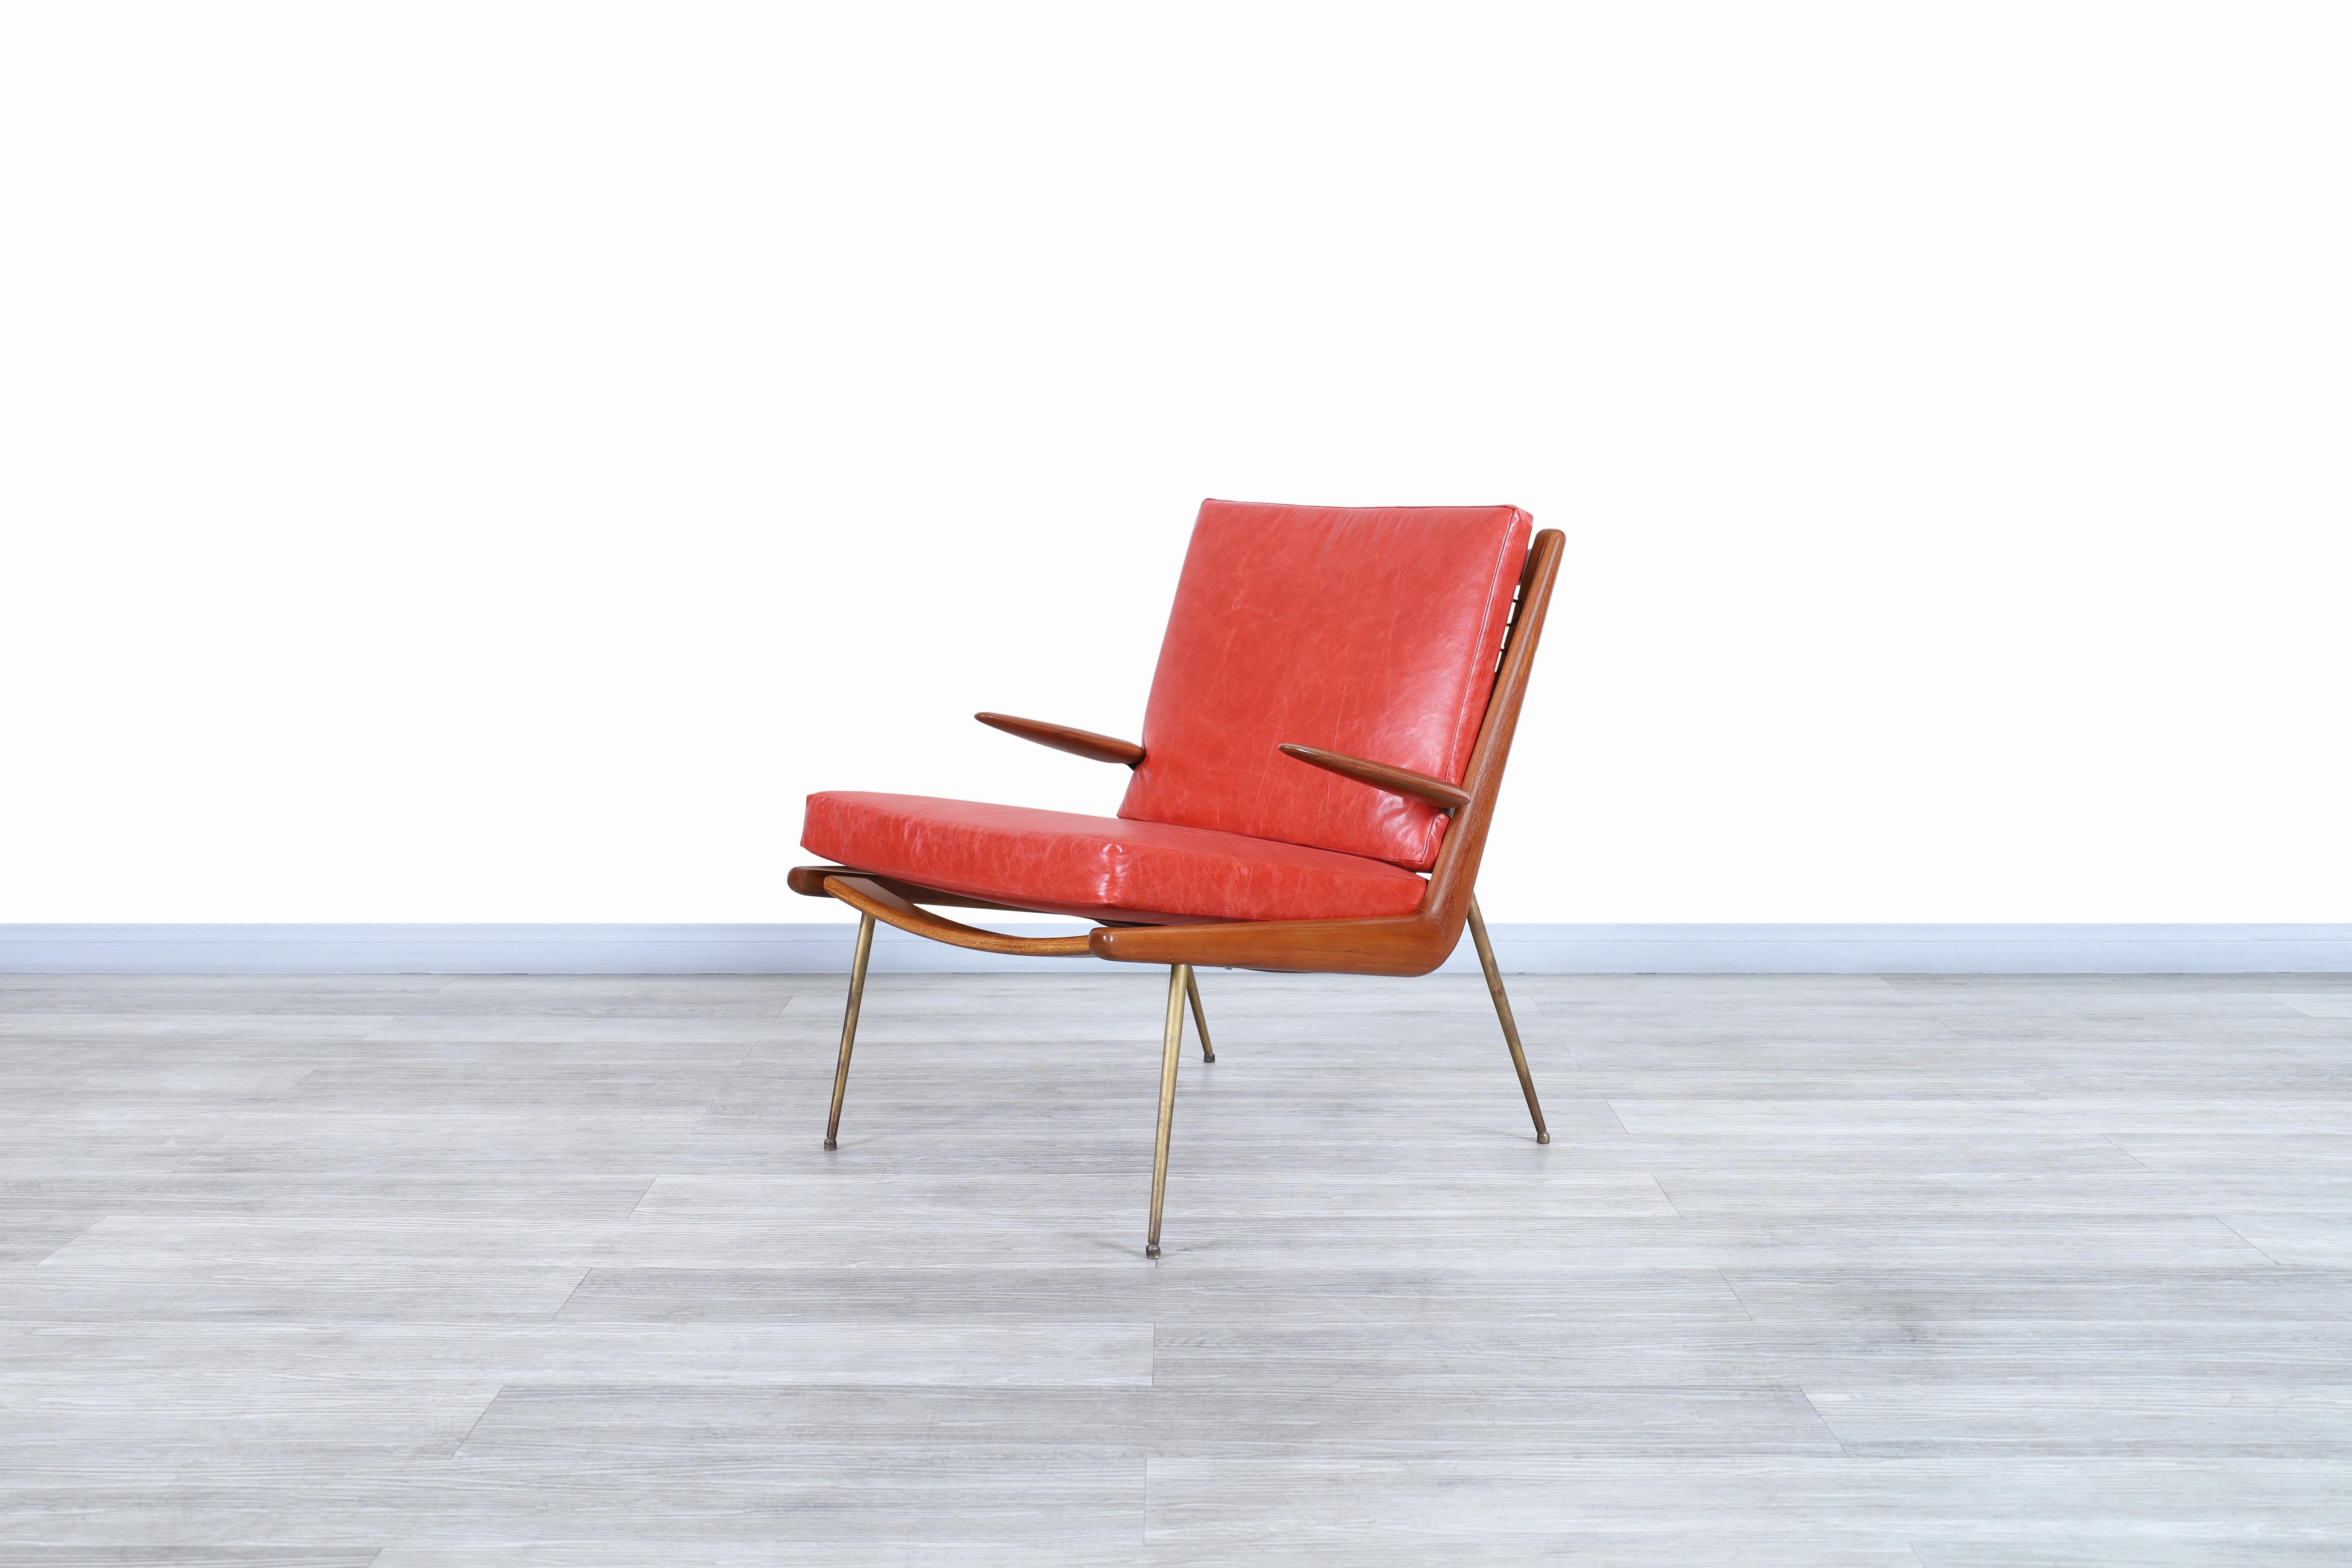 Wonderful Danish modern “Boomerang” lounge chair designed by Peter Hvid and Orla Molgaard-Nielsen for France & Daverkosen in Denmark, circa 1950s. This chair has been identified as model FD-135, standing out for the materials used in its